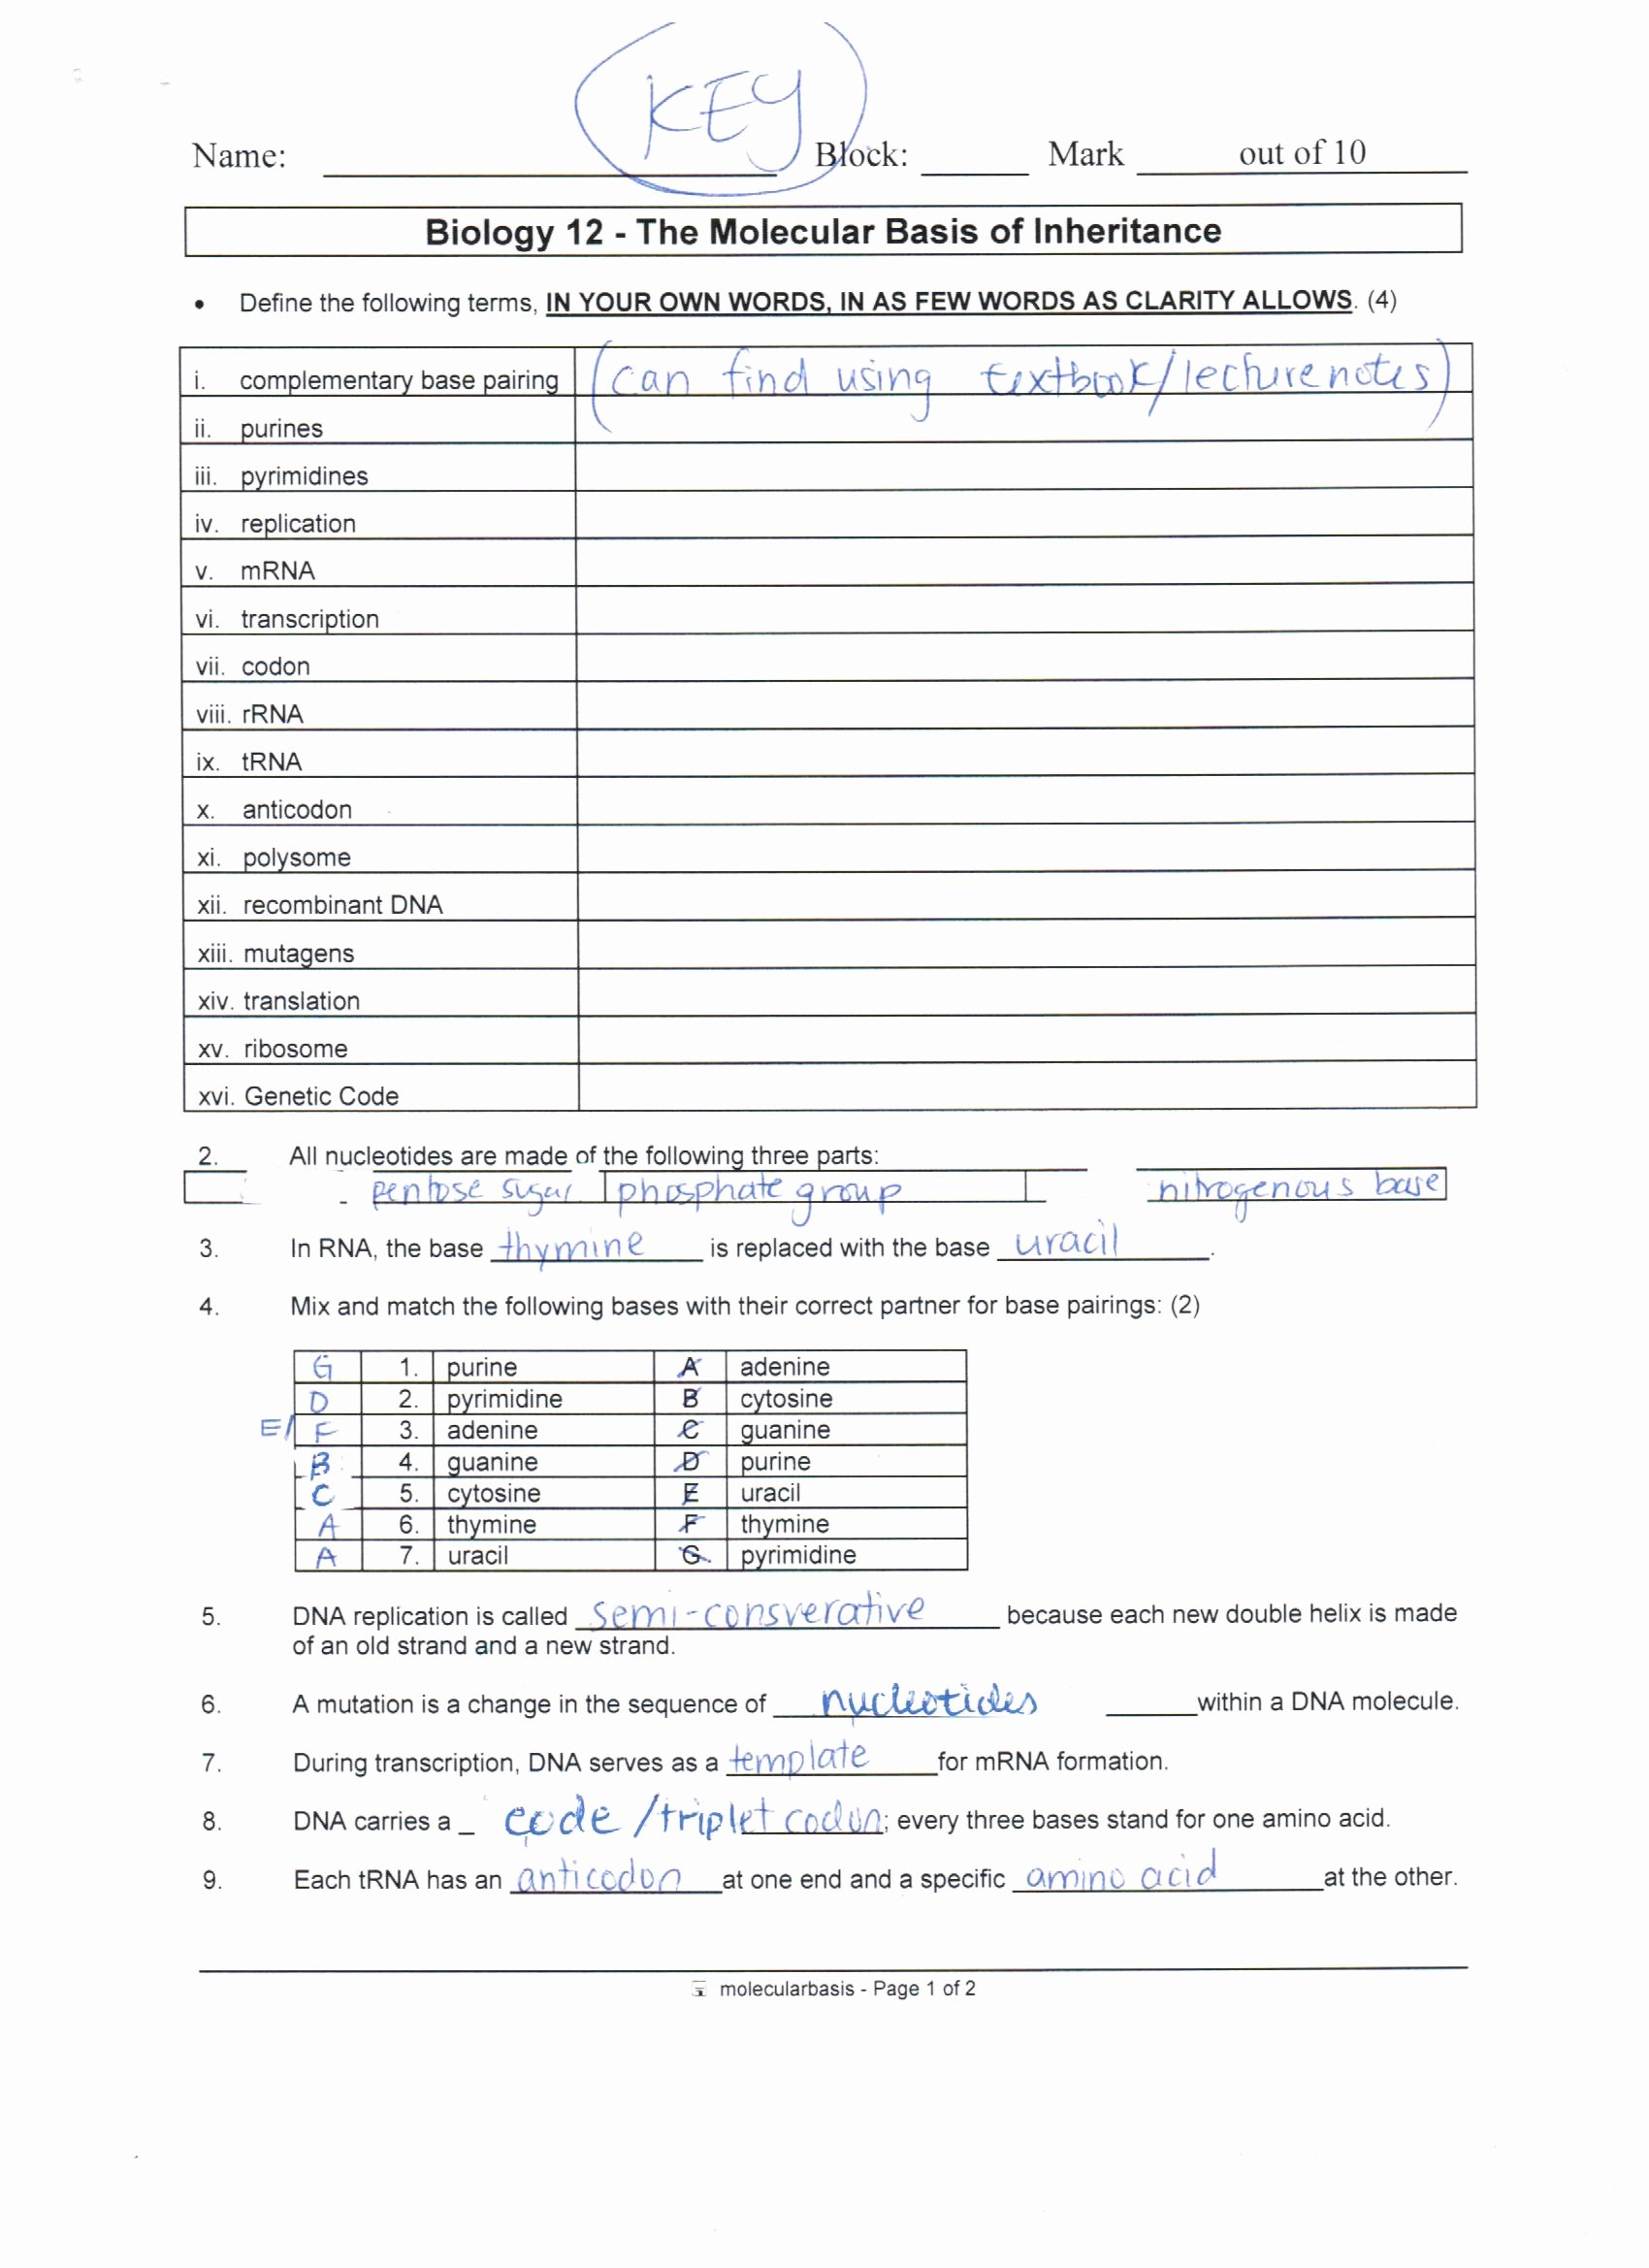 Protein Synthesis Review Worksheet Lovely Answer Key Dna Protein Synthesis and Mutations Review